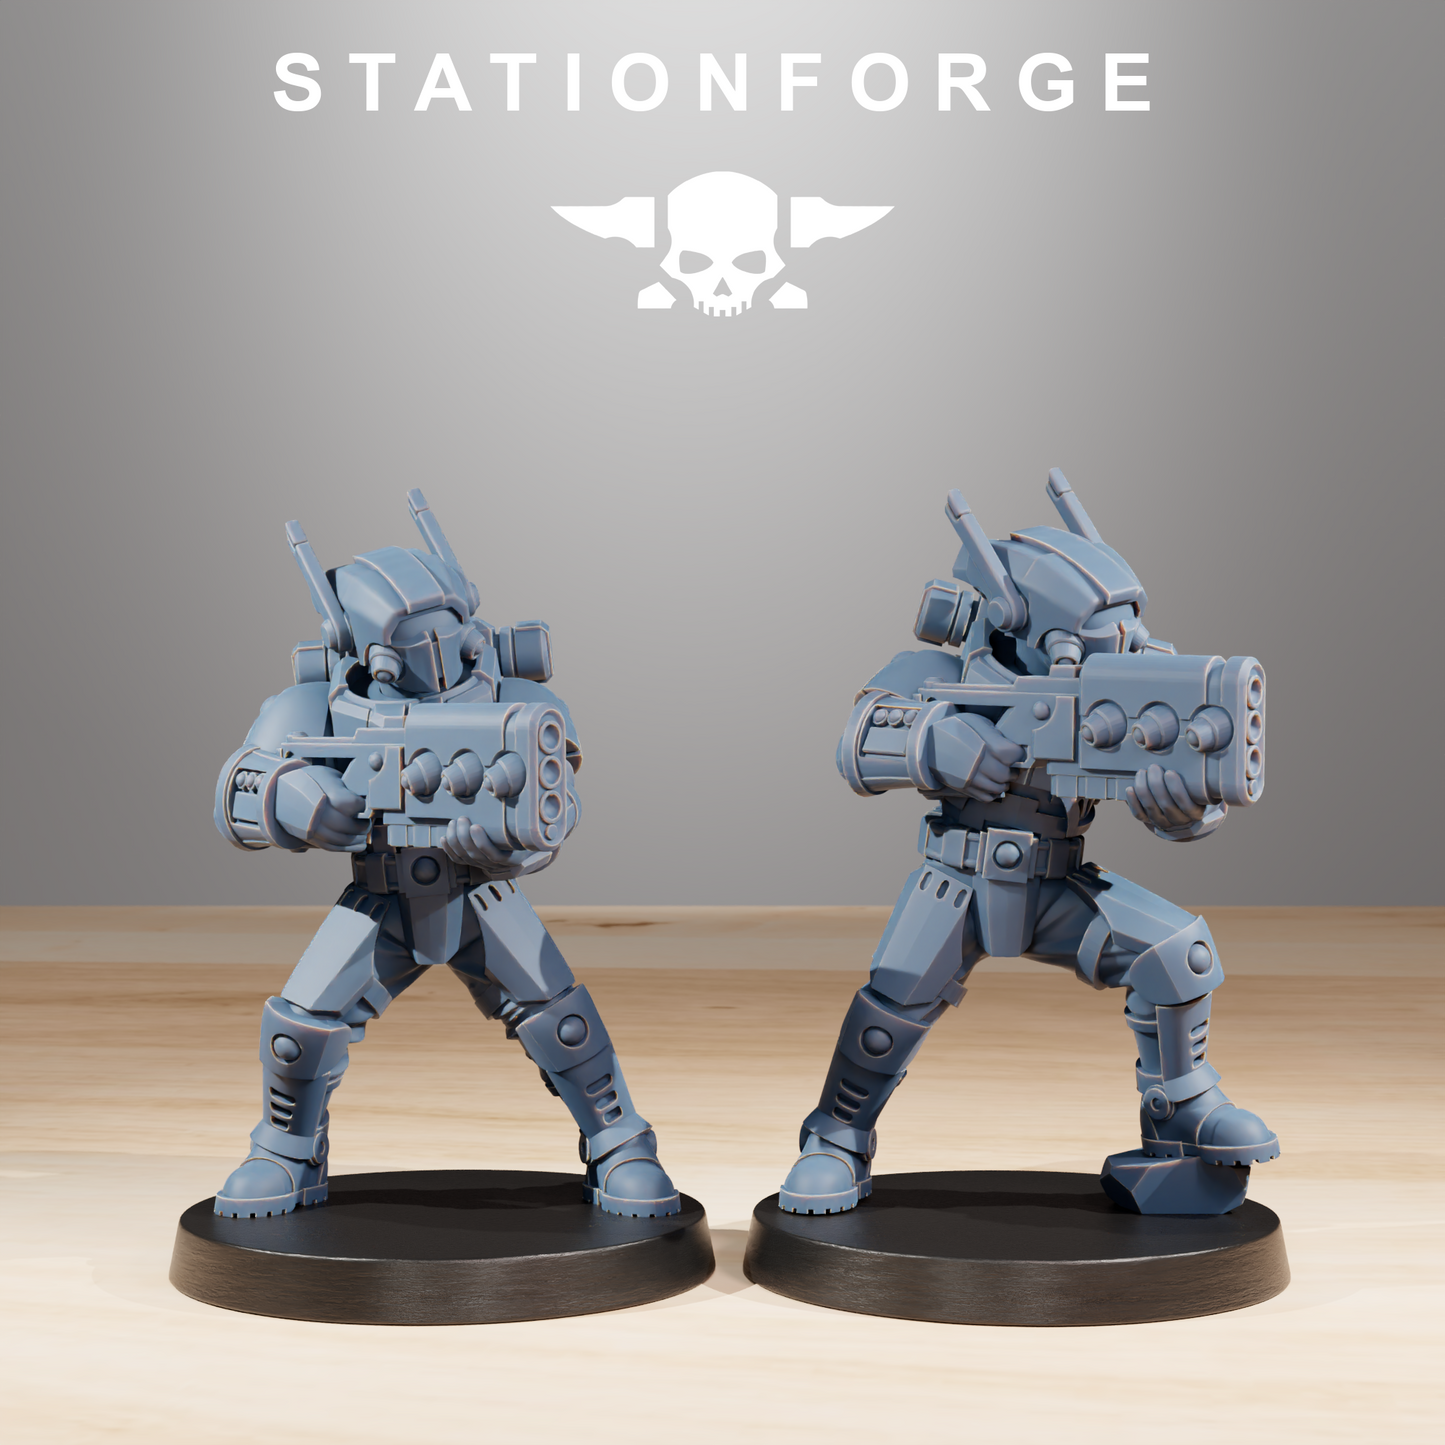 Tarion Clone Droid Warrior Infantry x10, Fire Team